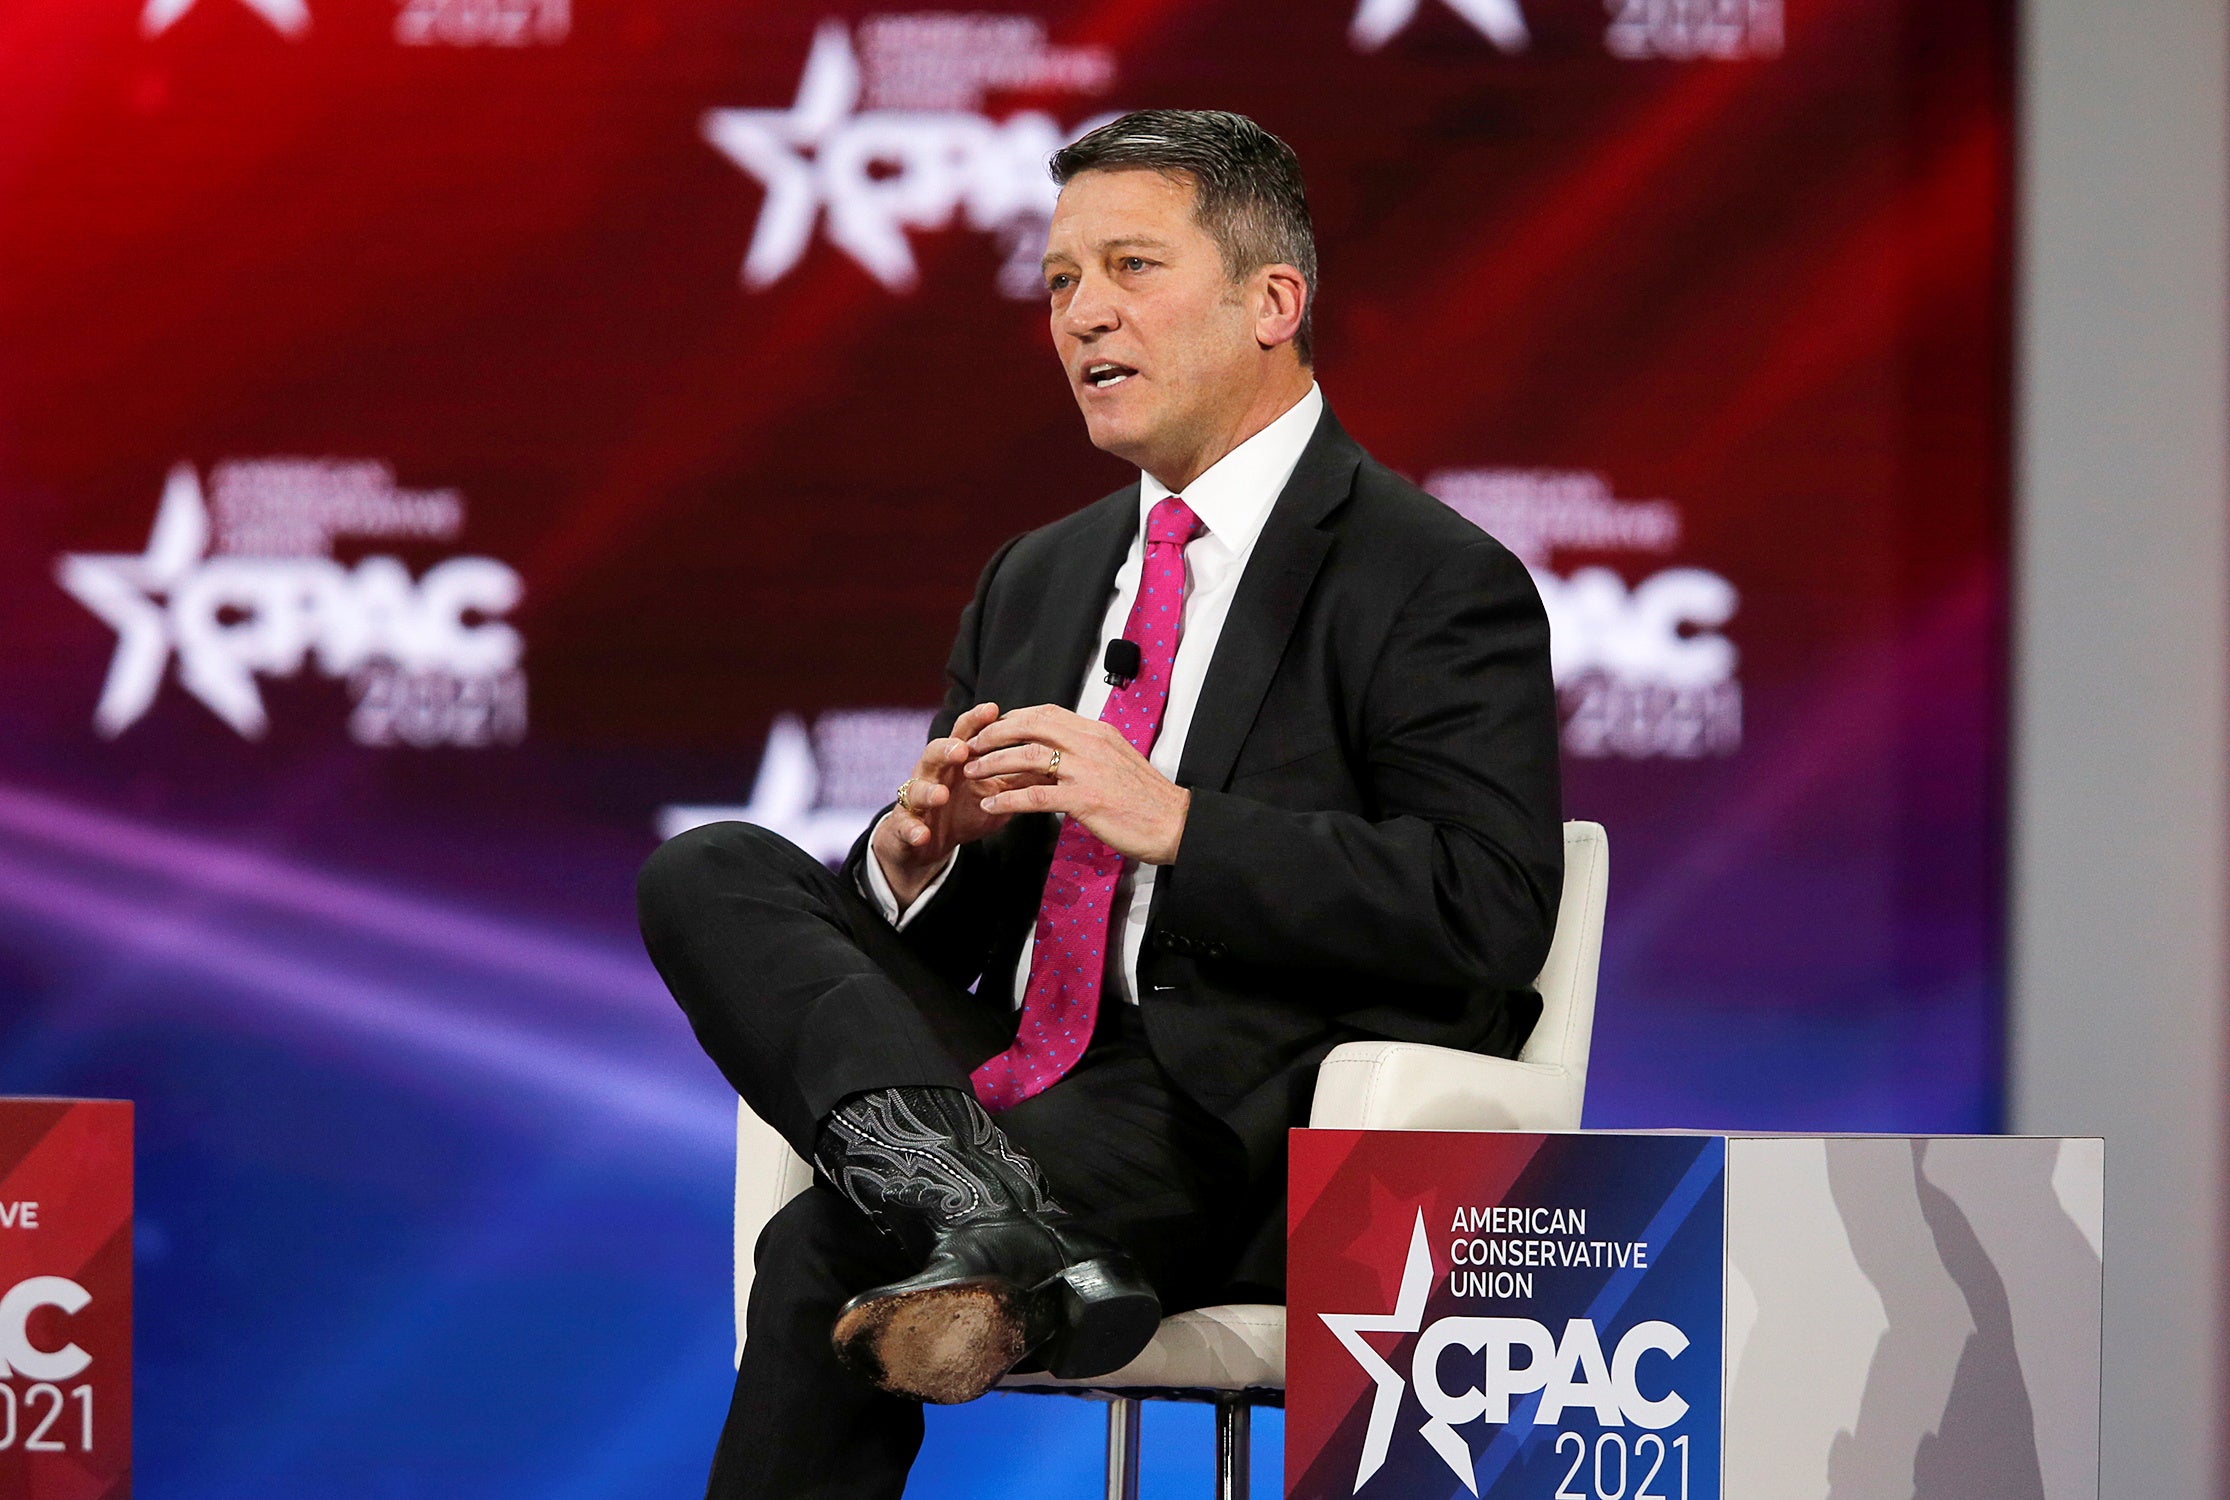 U.S. Rep. Ronny Jackson of Texas speaks at the Conservative Political Action Conference (CPAC) in Orlando, Florida, U.S. February 28, 2021. REUTERS/Joe Skipper